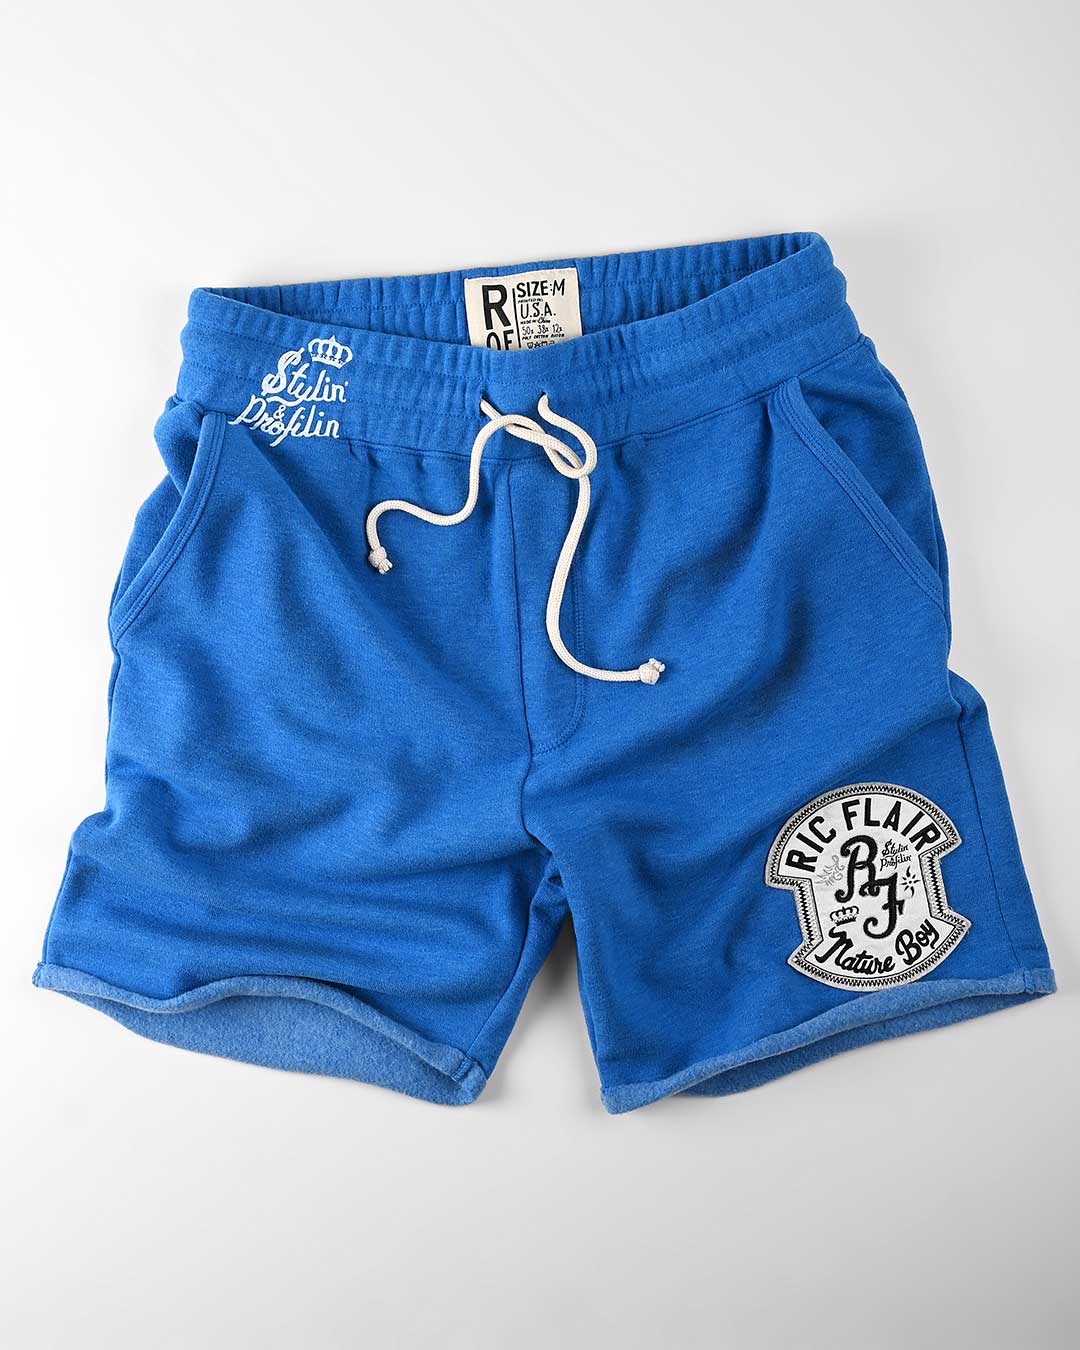 Ric Flair Nature Boy Blue Shorts - Roots of Fight